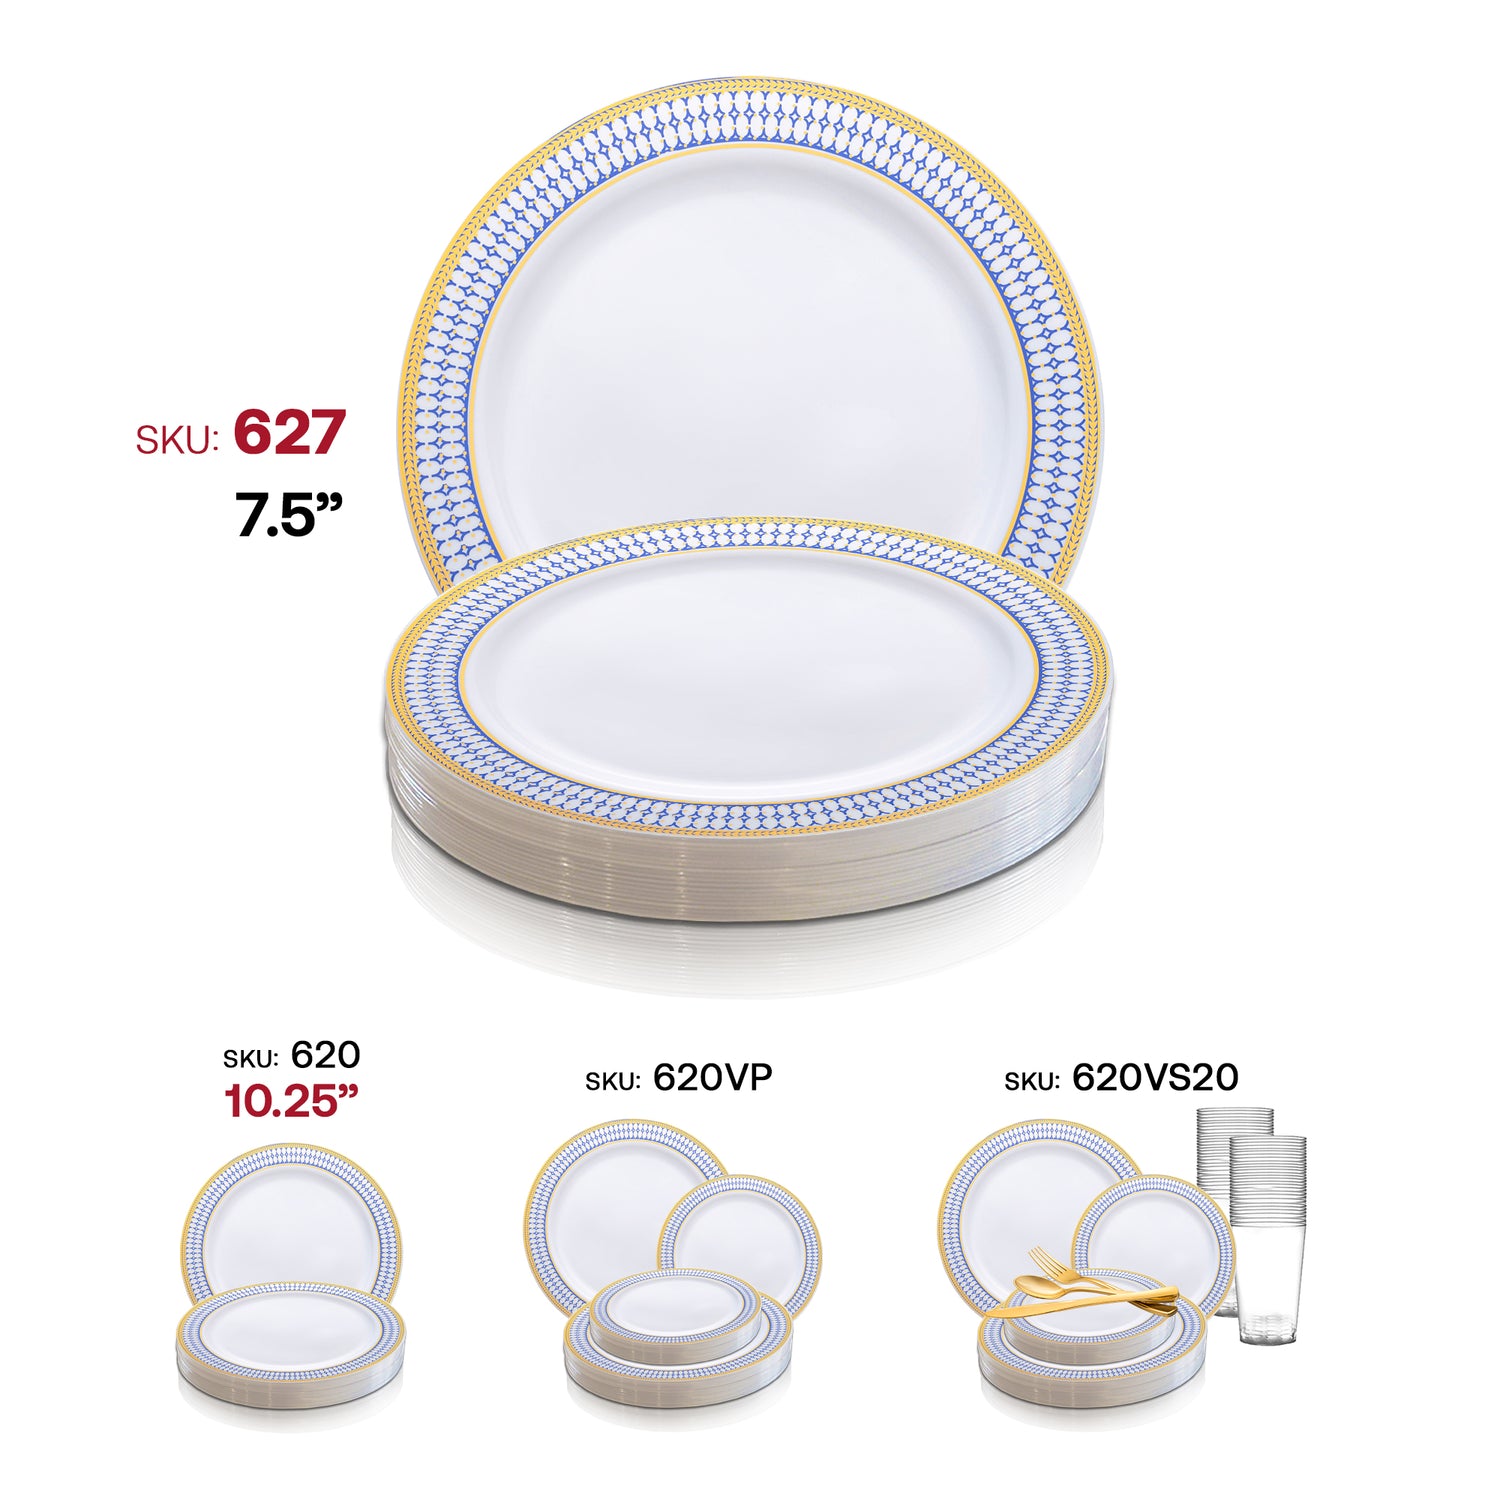 White with Blue and Gold Chord Rim Plastic Appetizer/Salad Plates (7.5") SKU | The Kaya Collection